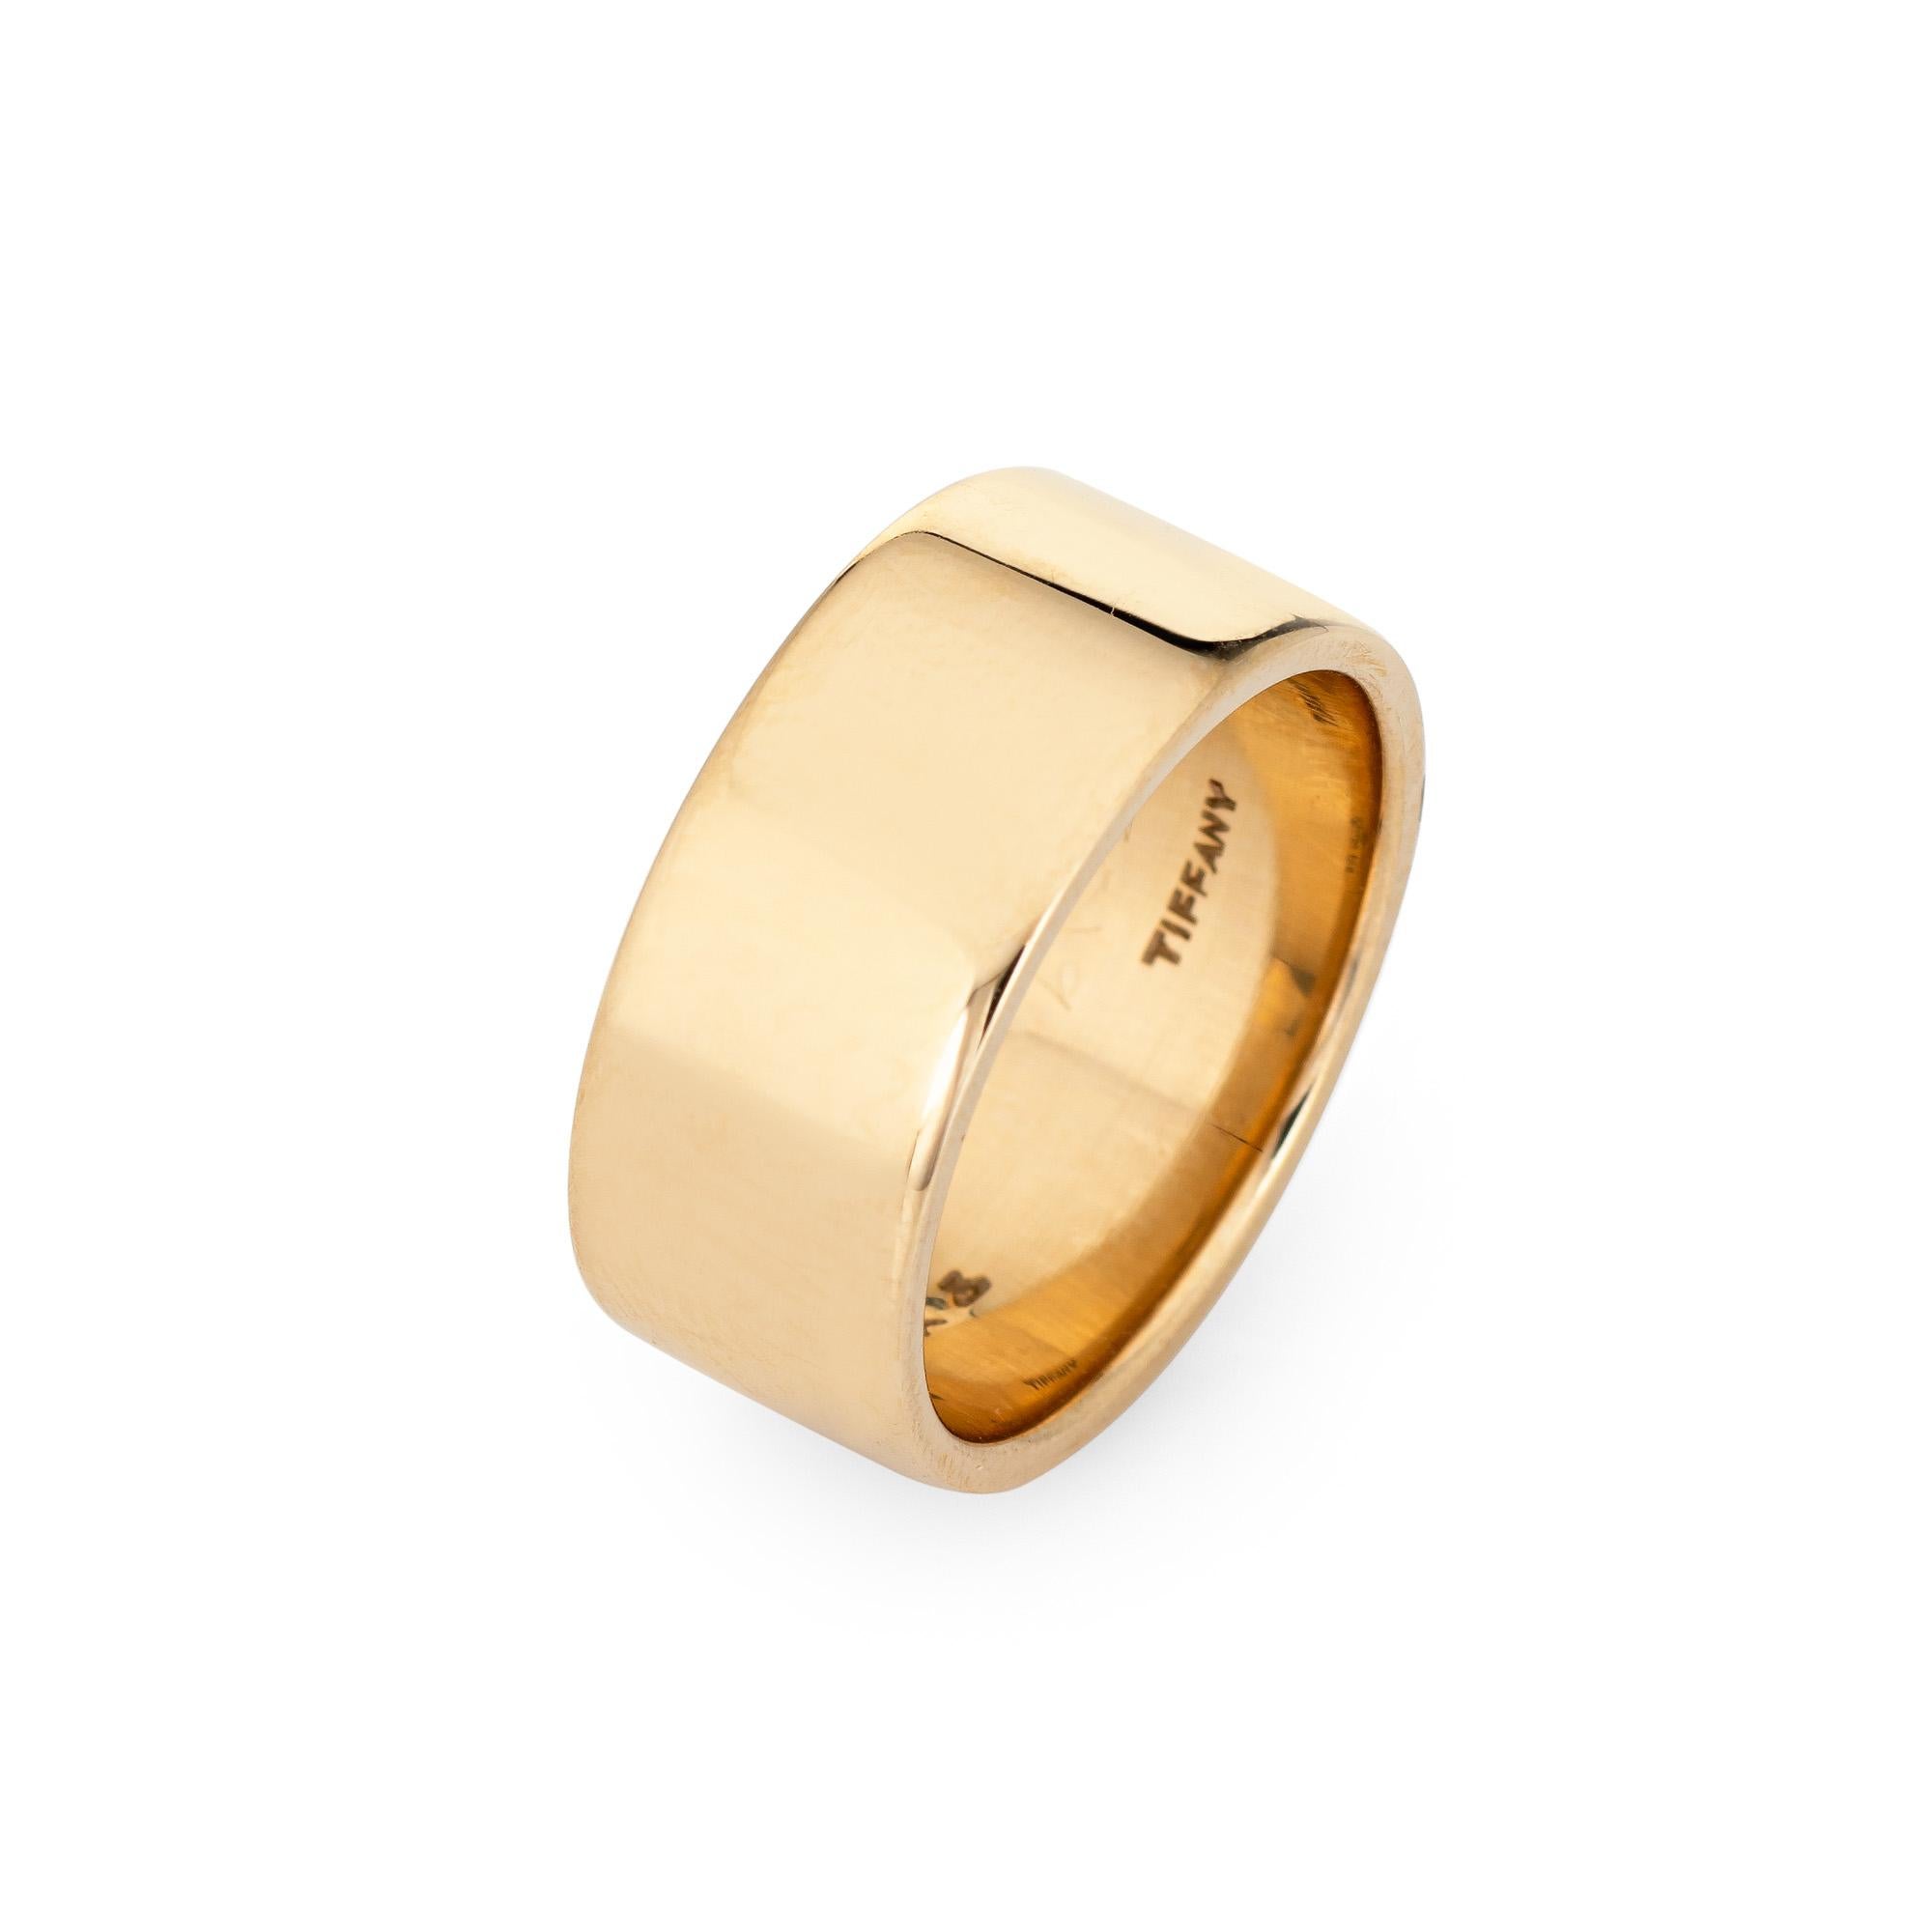 Vintage Tiffany & Co wide band ring crafted in 14 karat yellow gold (circa 1950s to 1960s).  

The 8mm wide band (0.31 inches) is great worn alone or stacked with your fine jewelry from any era. The high polish band sits flat on the finger (rises